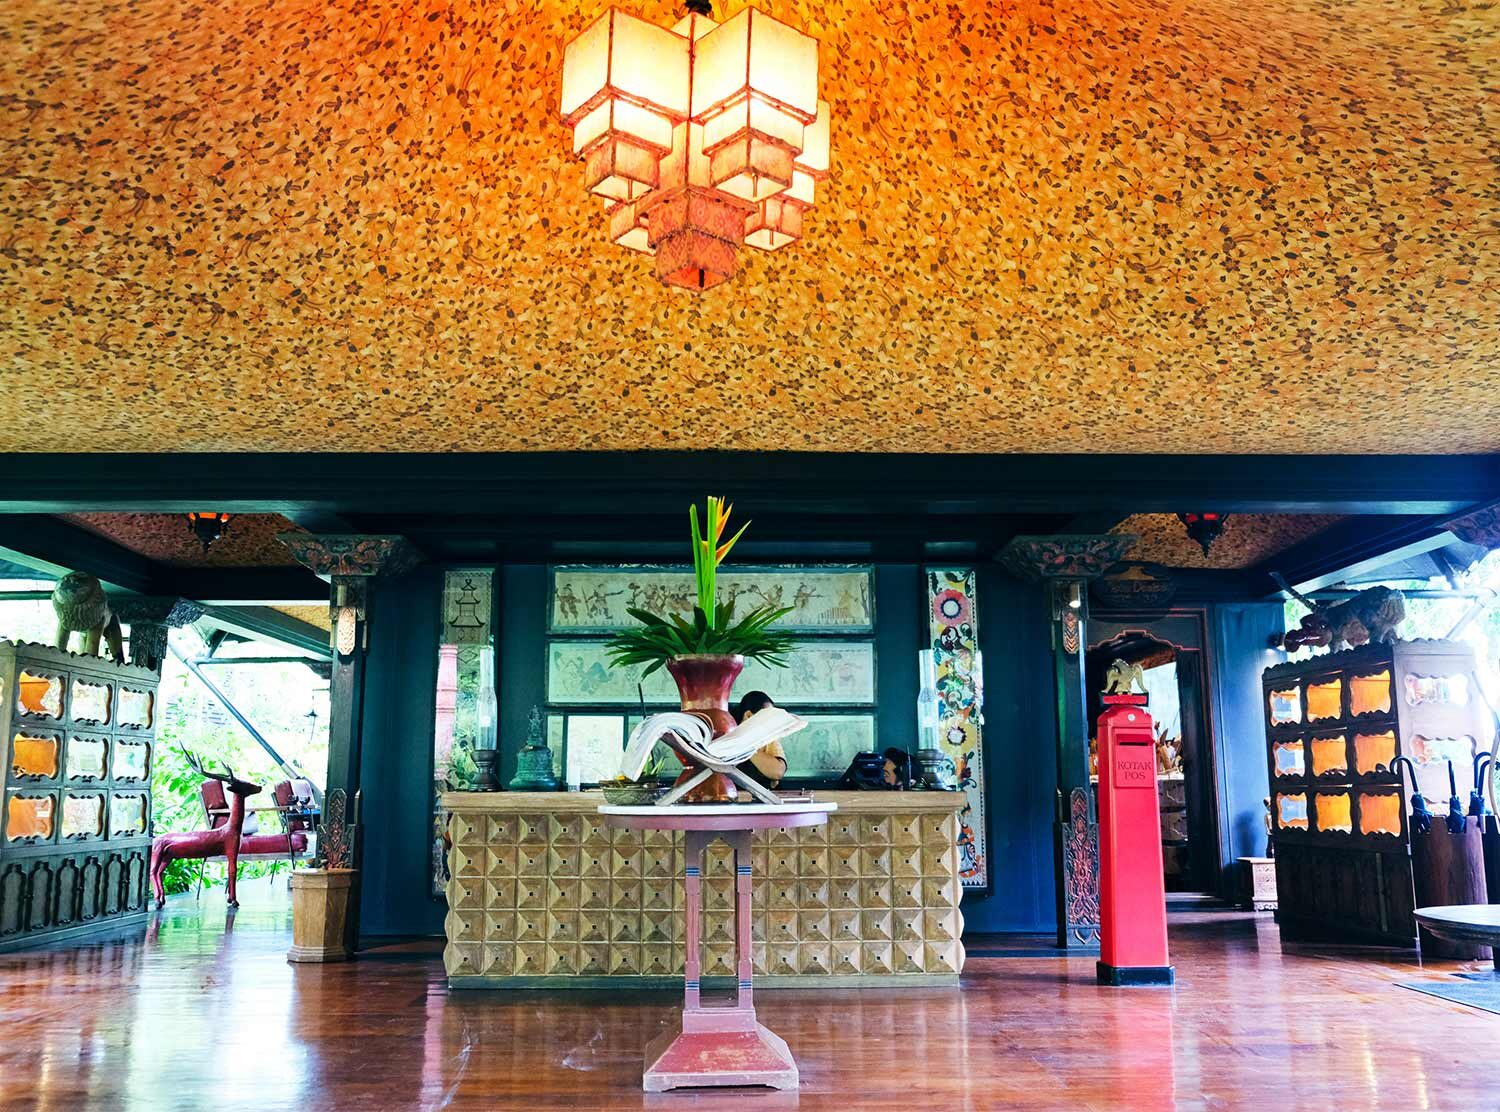 Capella Ubud The lobby is the first showstopper upon arrival. The staff is warm and thorough, and the colorful fabric creates the optical illusion of an endless ceiling, a feast!